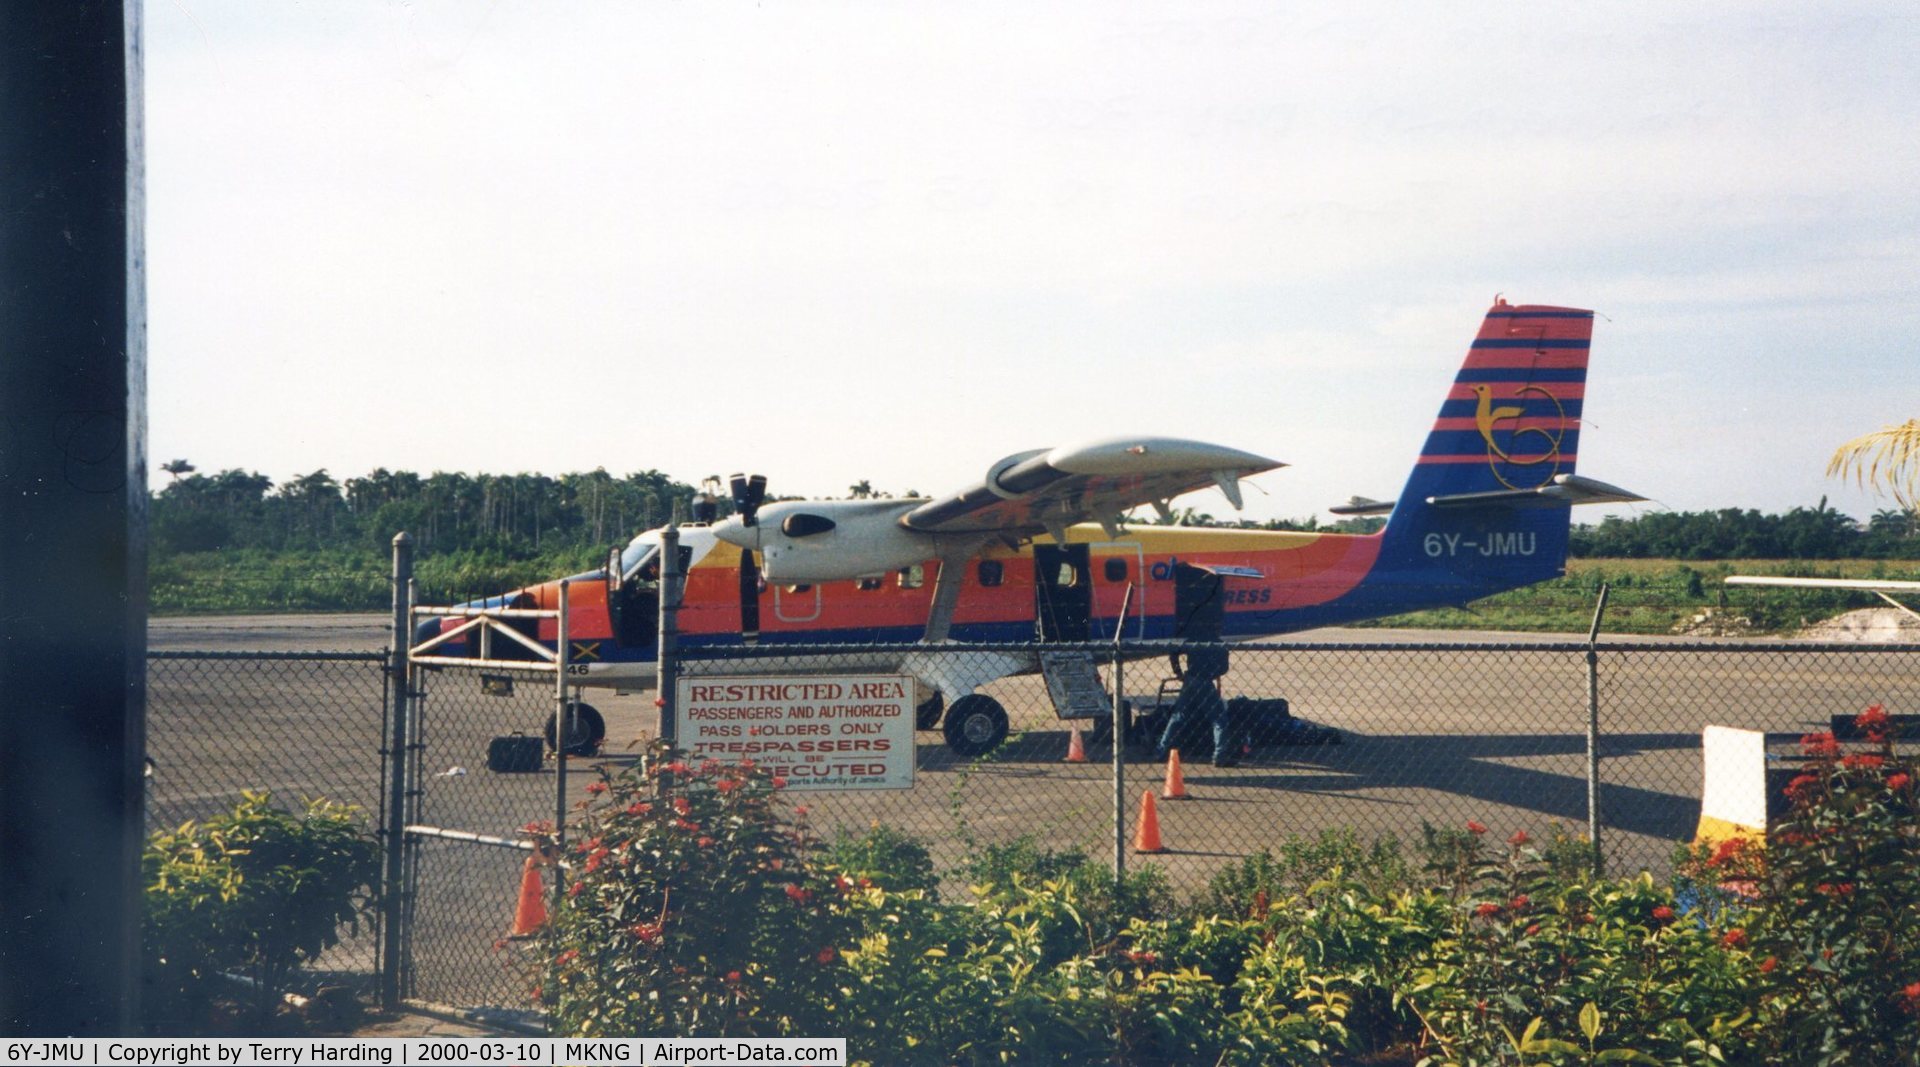 6Y-JMU, 1977 De Havilland Canada DHC-6-300 Twin Otter C/N 532, At Negril Airport, Jamaica (NEG) March 2000 just before departing on a flight to Montego Bay (MBJ)